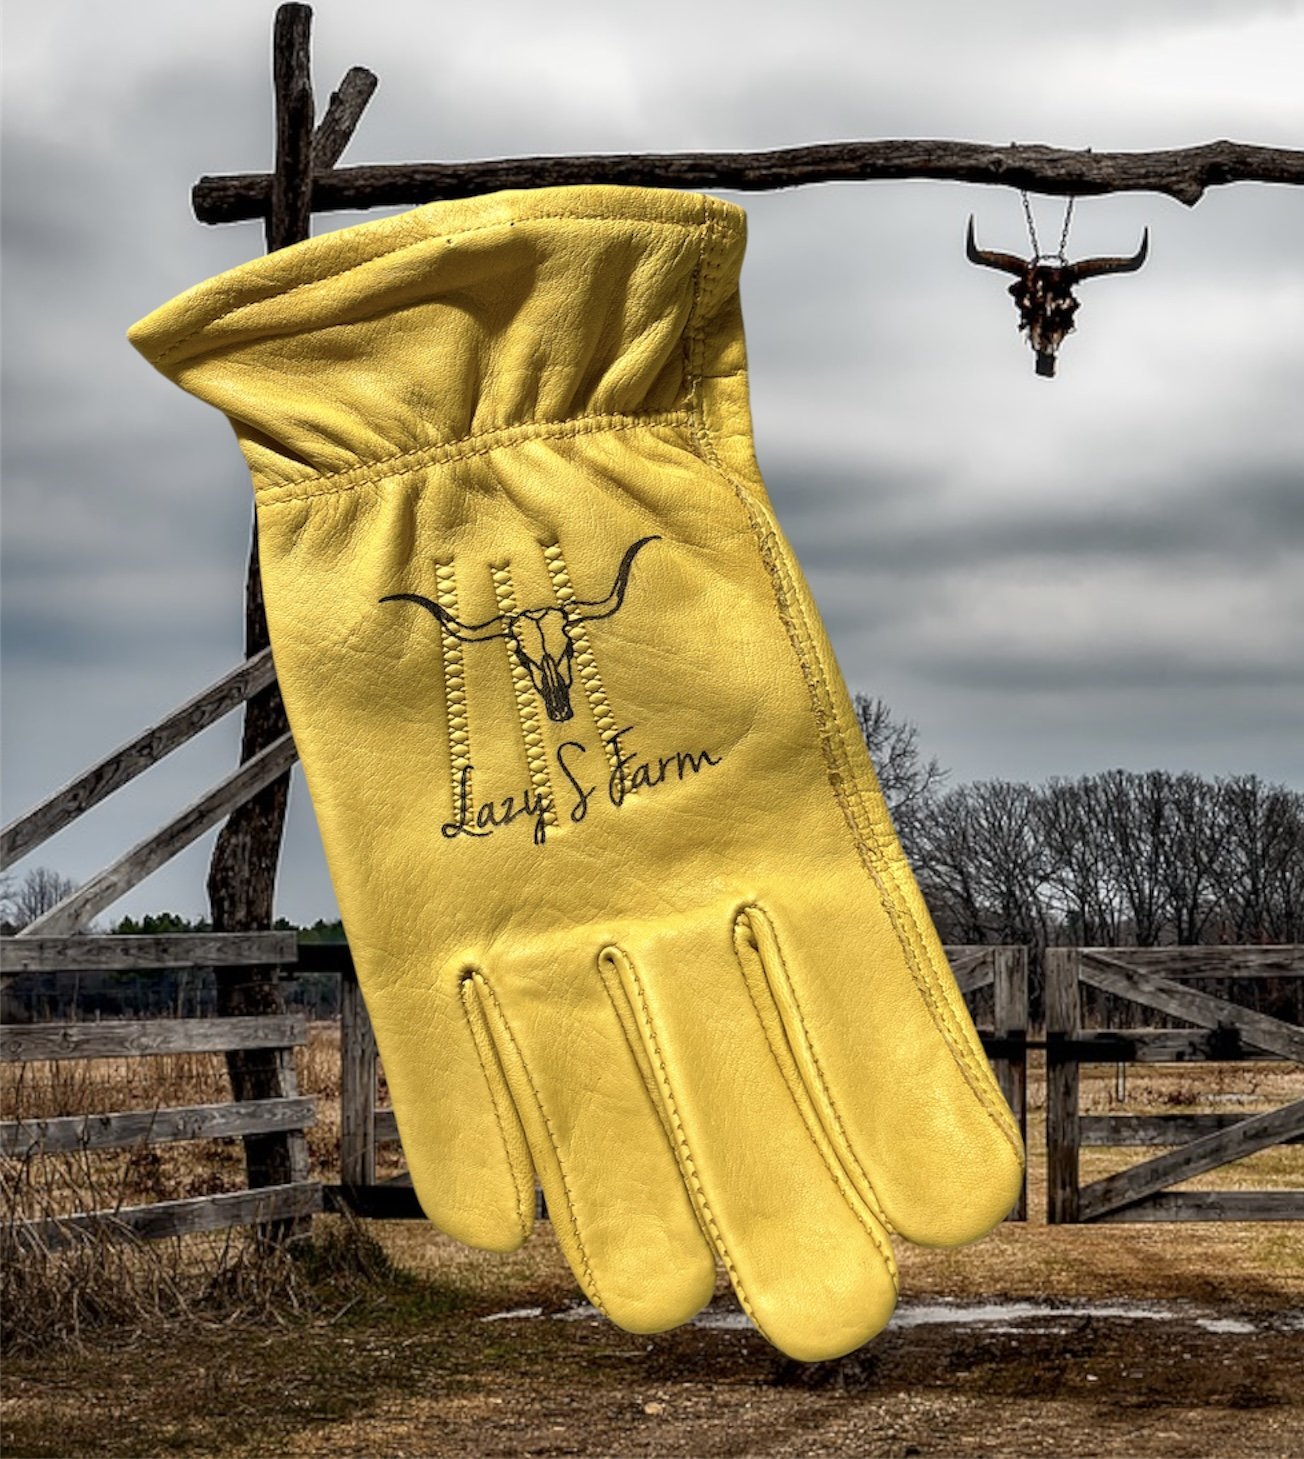 Best Stocking Stuffer Ideas for Farmers that will make them smile